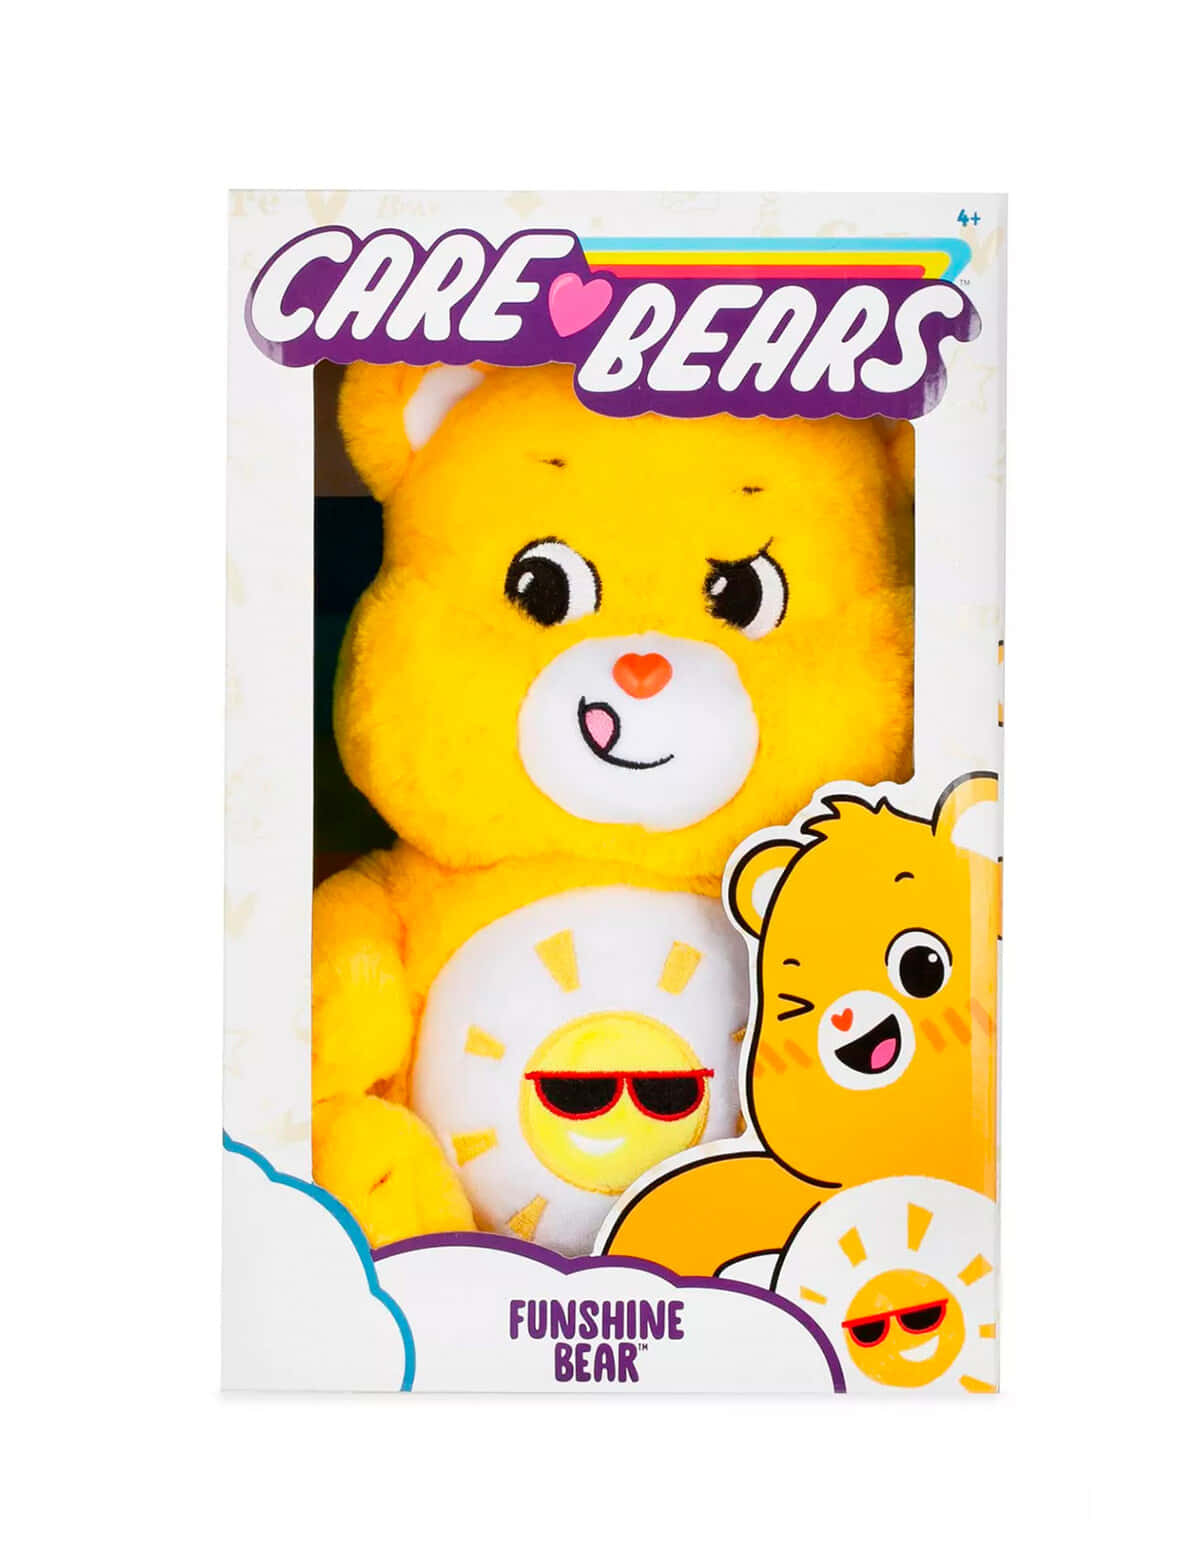 "Share a Huggable Hug with your Favorite Care Bear!"